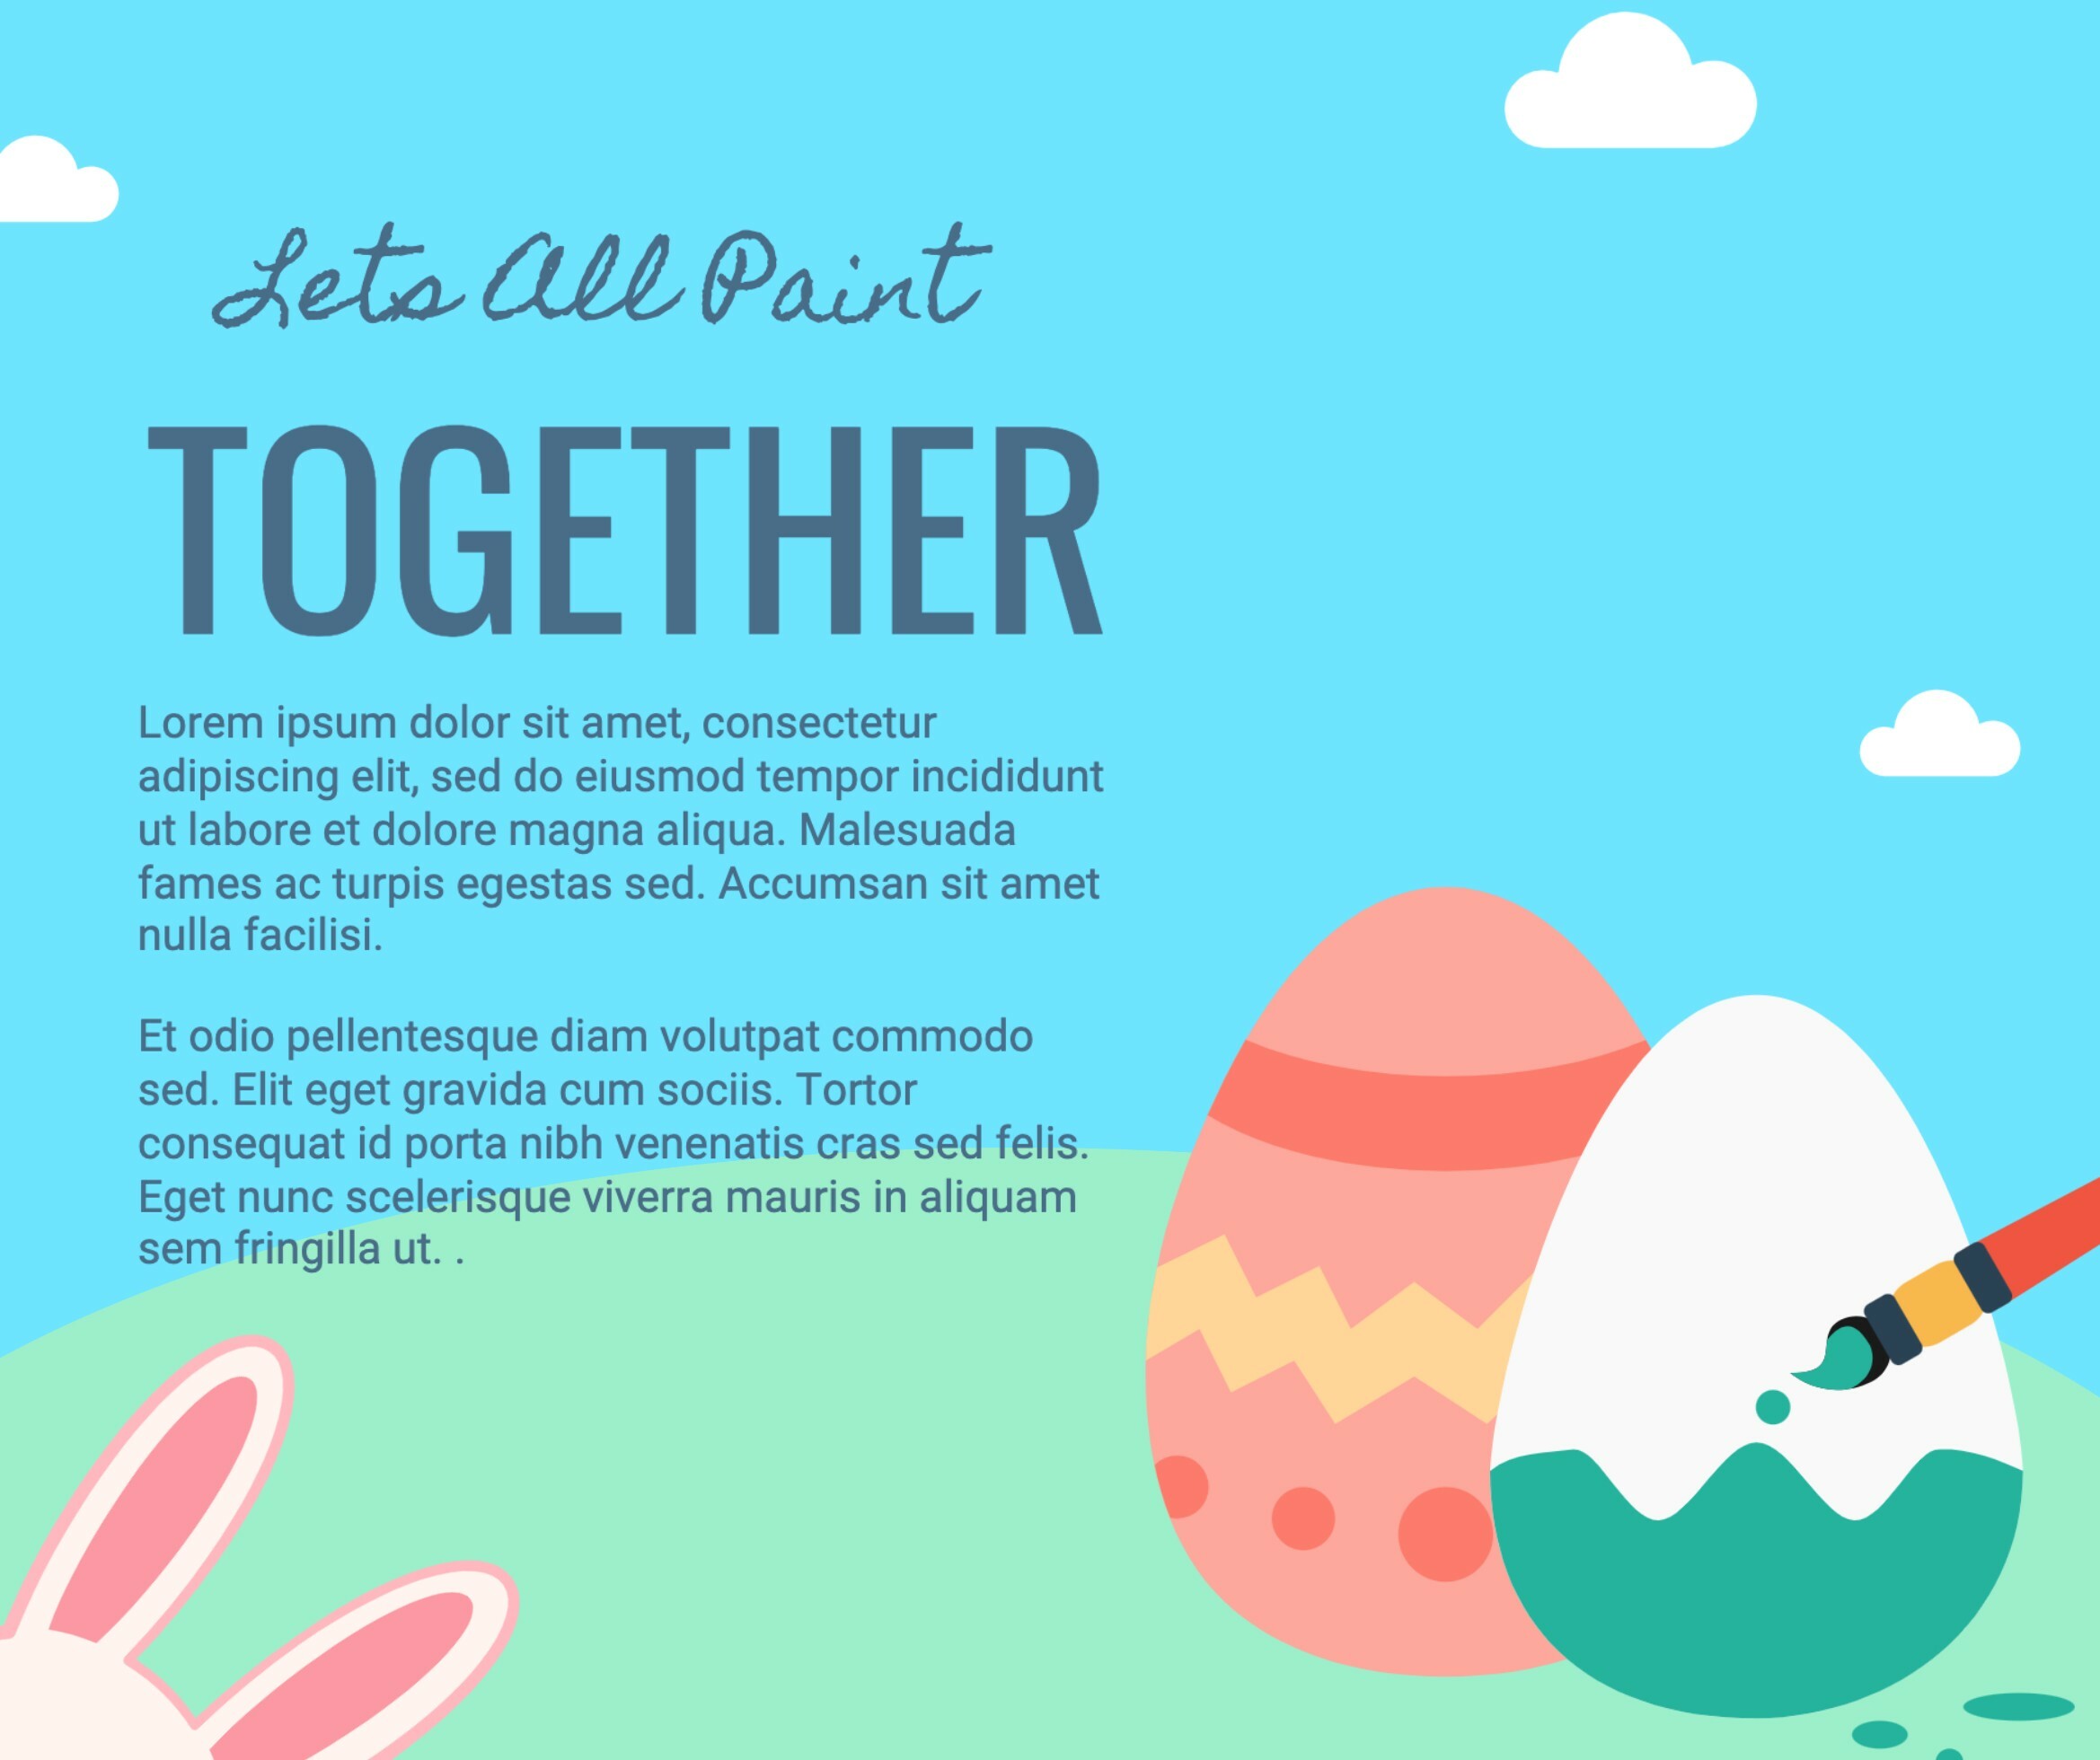 Easter Promo template